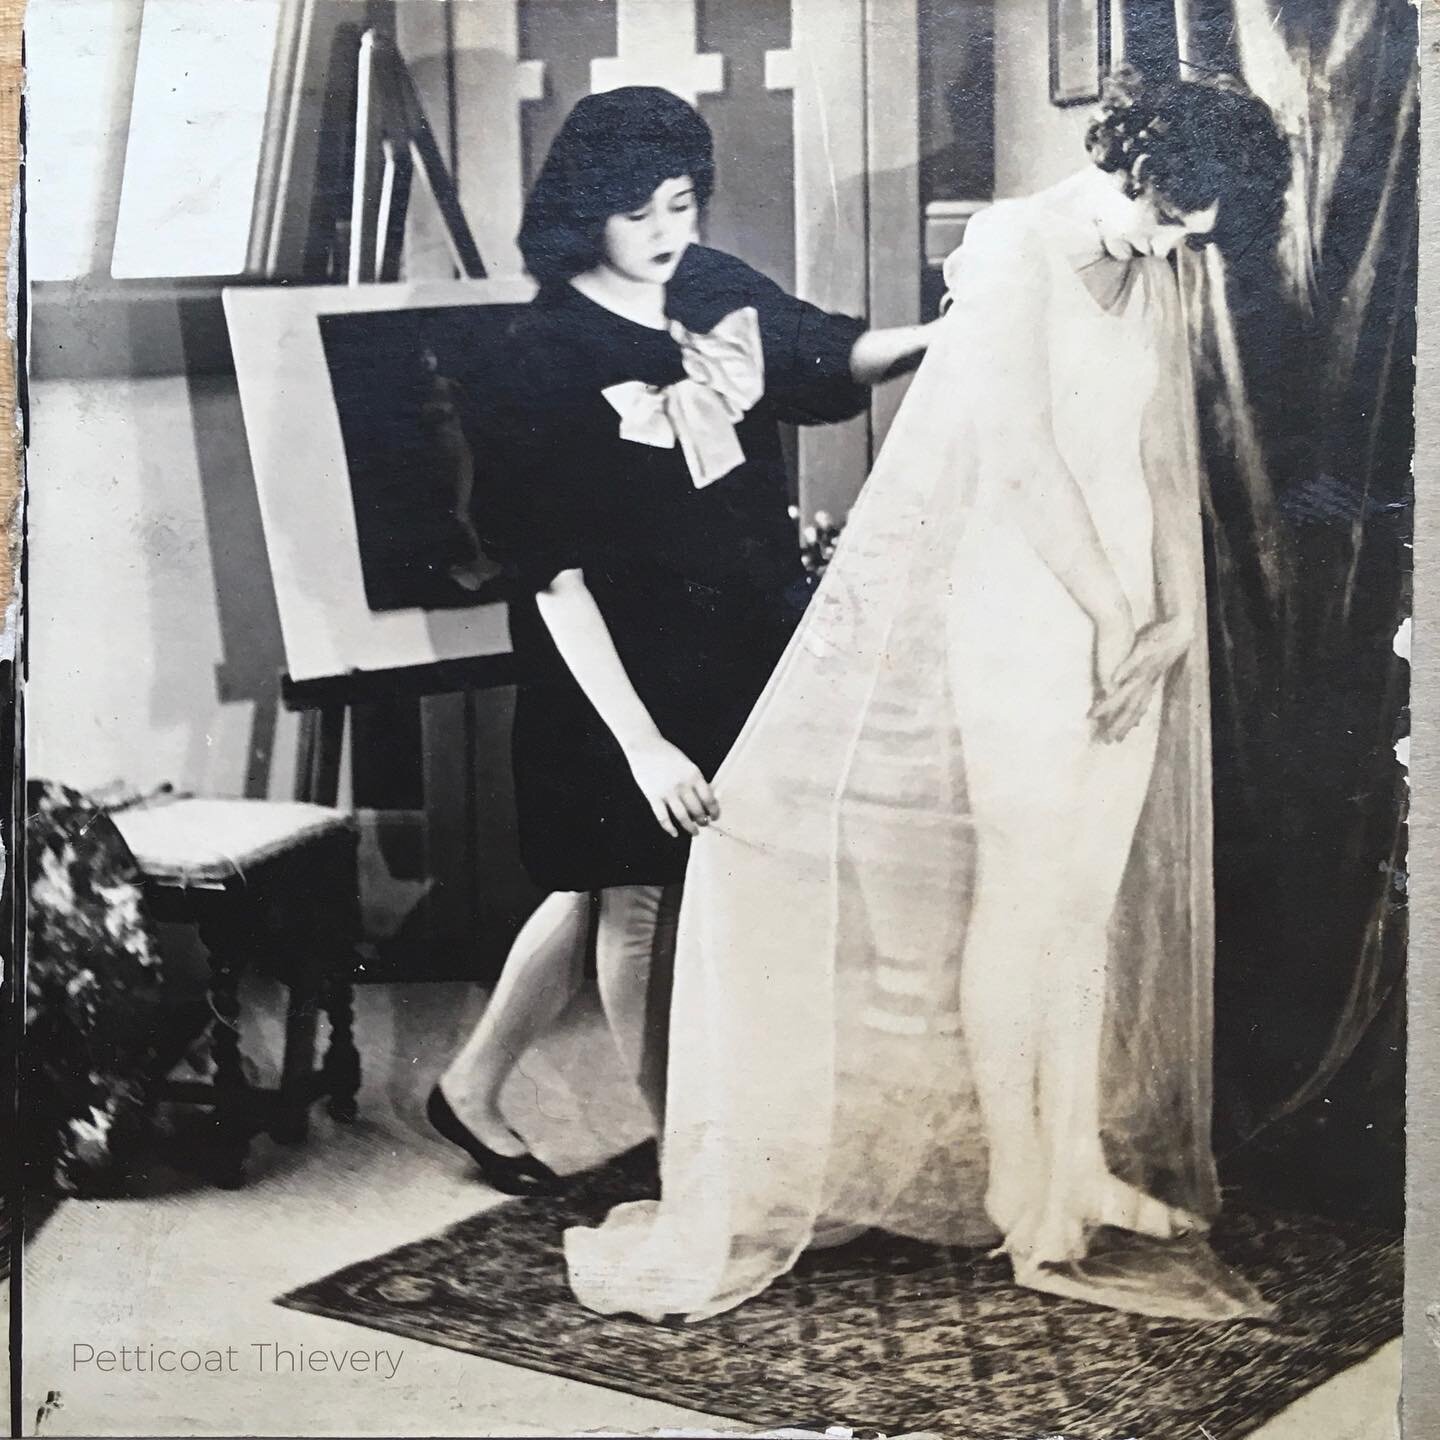 This looks like half of an old stereo card of a silent film or avante garde ballet costume fitting. Recognise either of these faces or costumes? 
.
.
.
.
This found photo: circa 1920.
.
.
.
.
.
#vintage #vintagefashion #vintagestyle #vintagephotograp